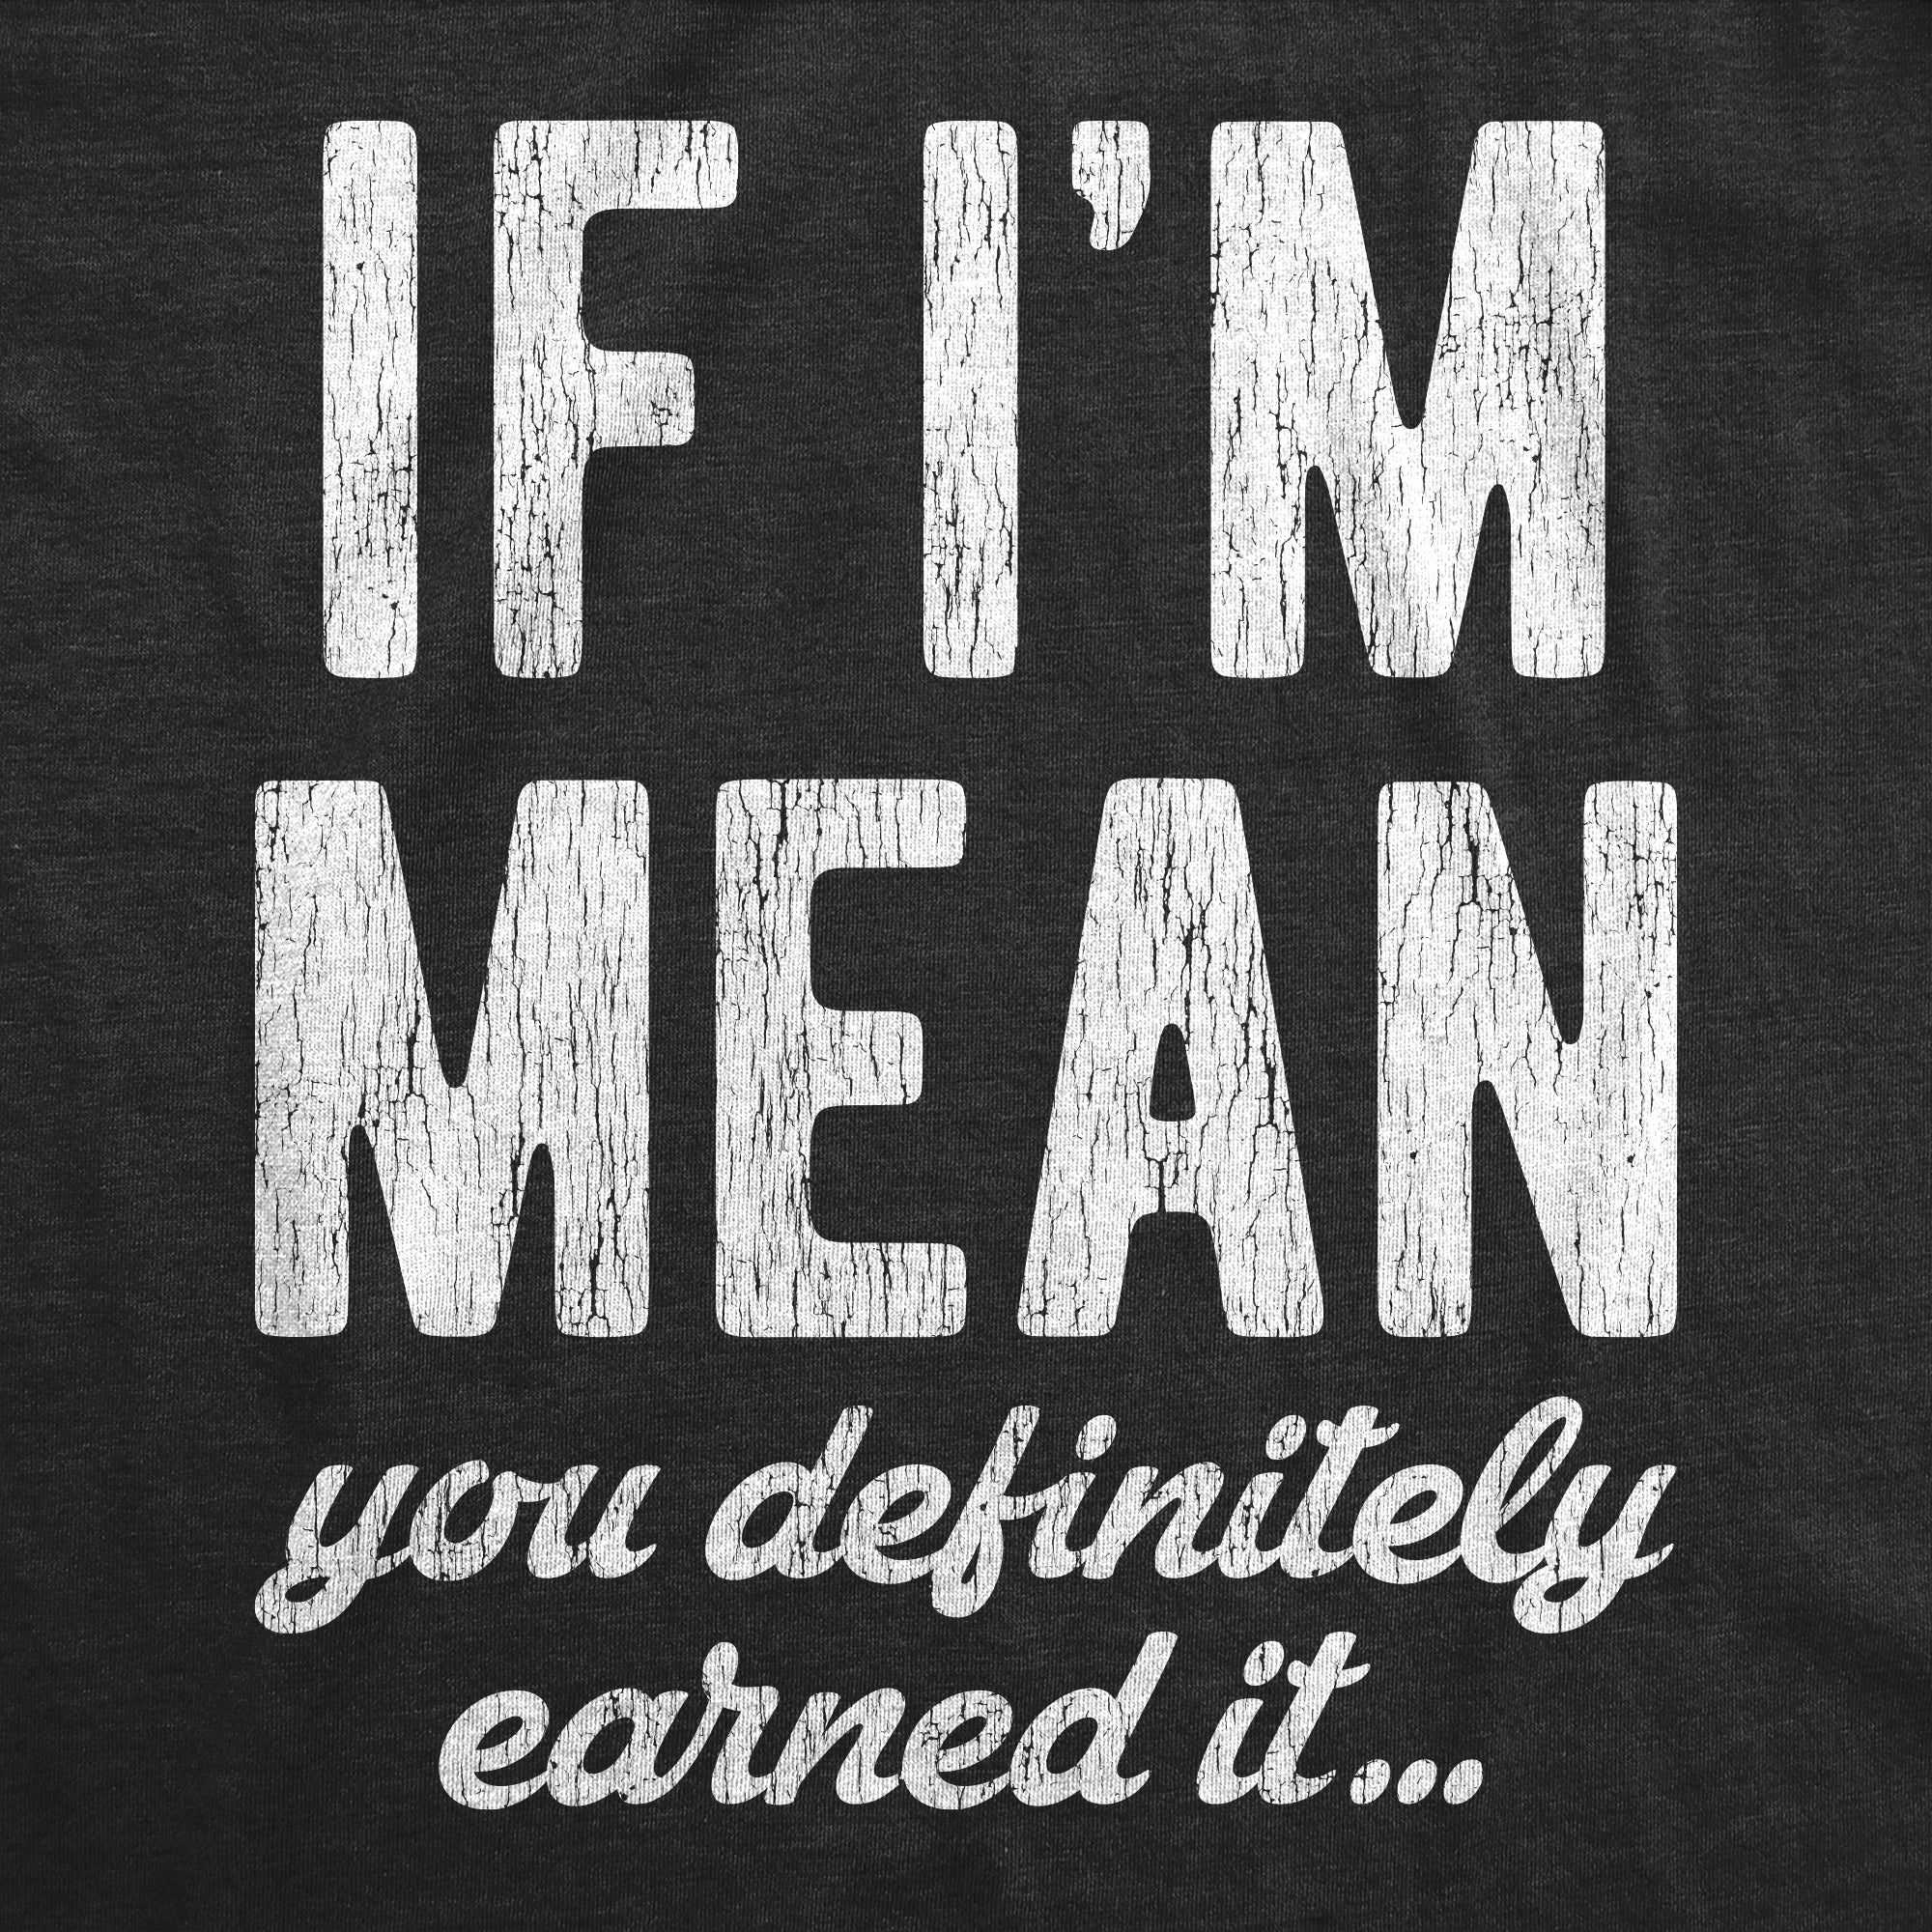 Funny Heather Black If I'm Mean You Definitely Earned It Womens T Shirt Nerdy Sarcastic Tee